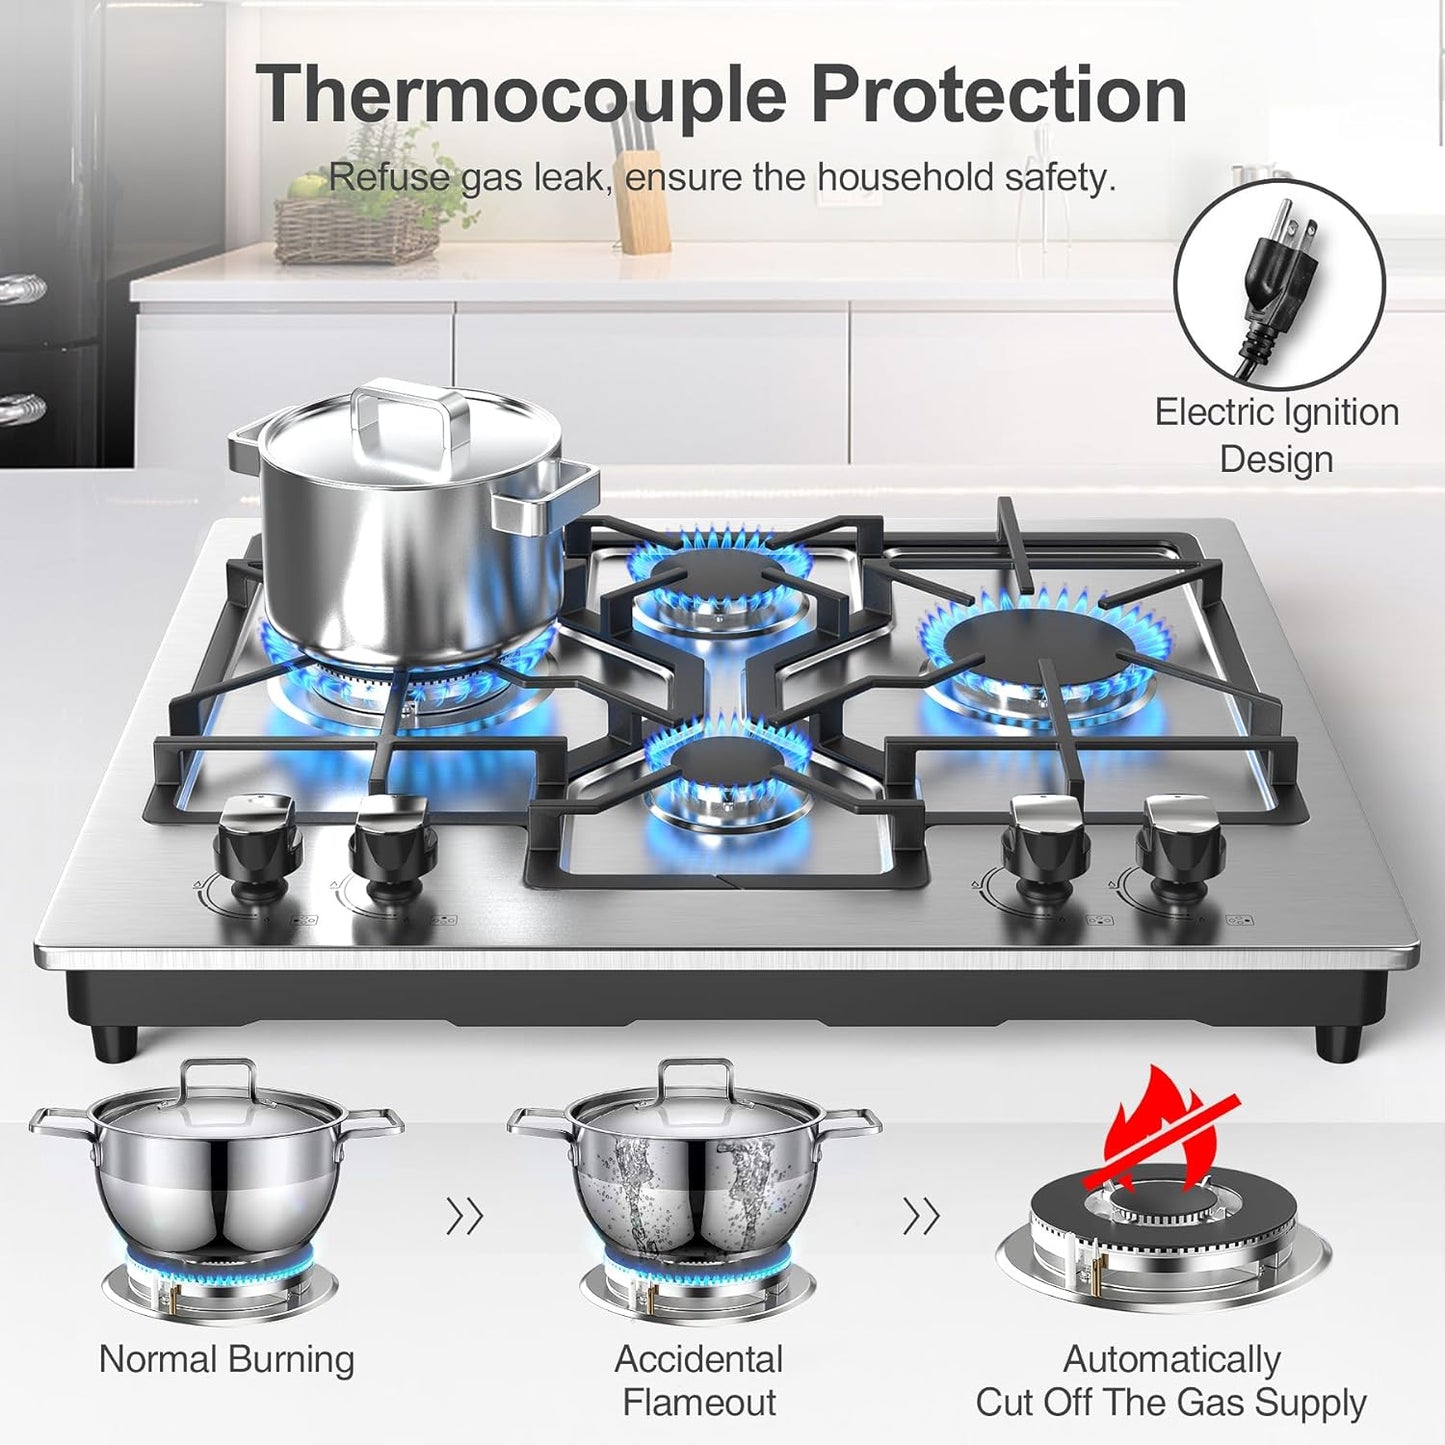 GIHETKUT Gas Cooktop 4 Burners, 23Inch Stainless Steel Gas Stove Top, Built-in Gas Propane Cooktops with Thermocouple Protection, NG/LPG Convertible, Electronic